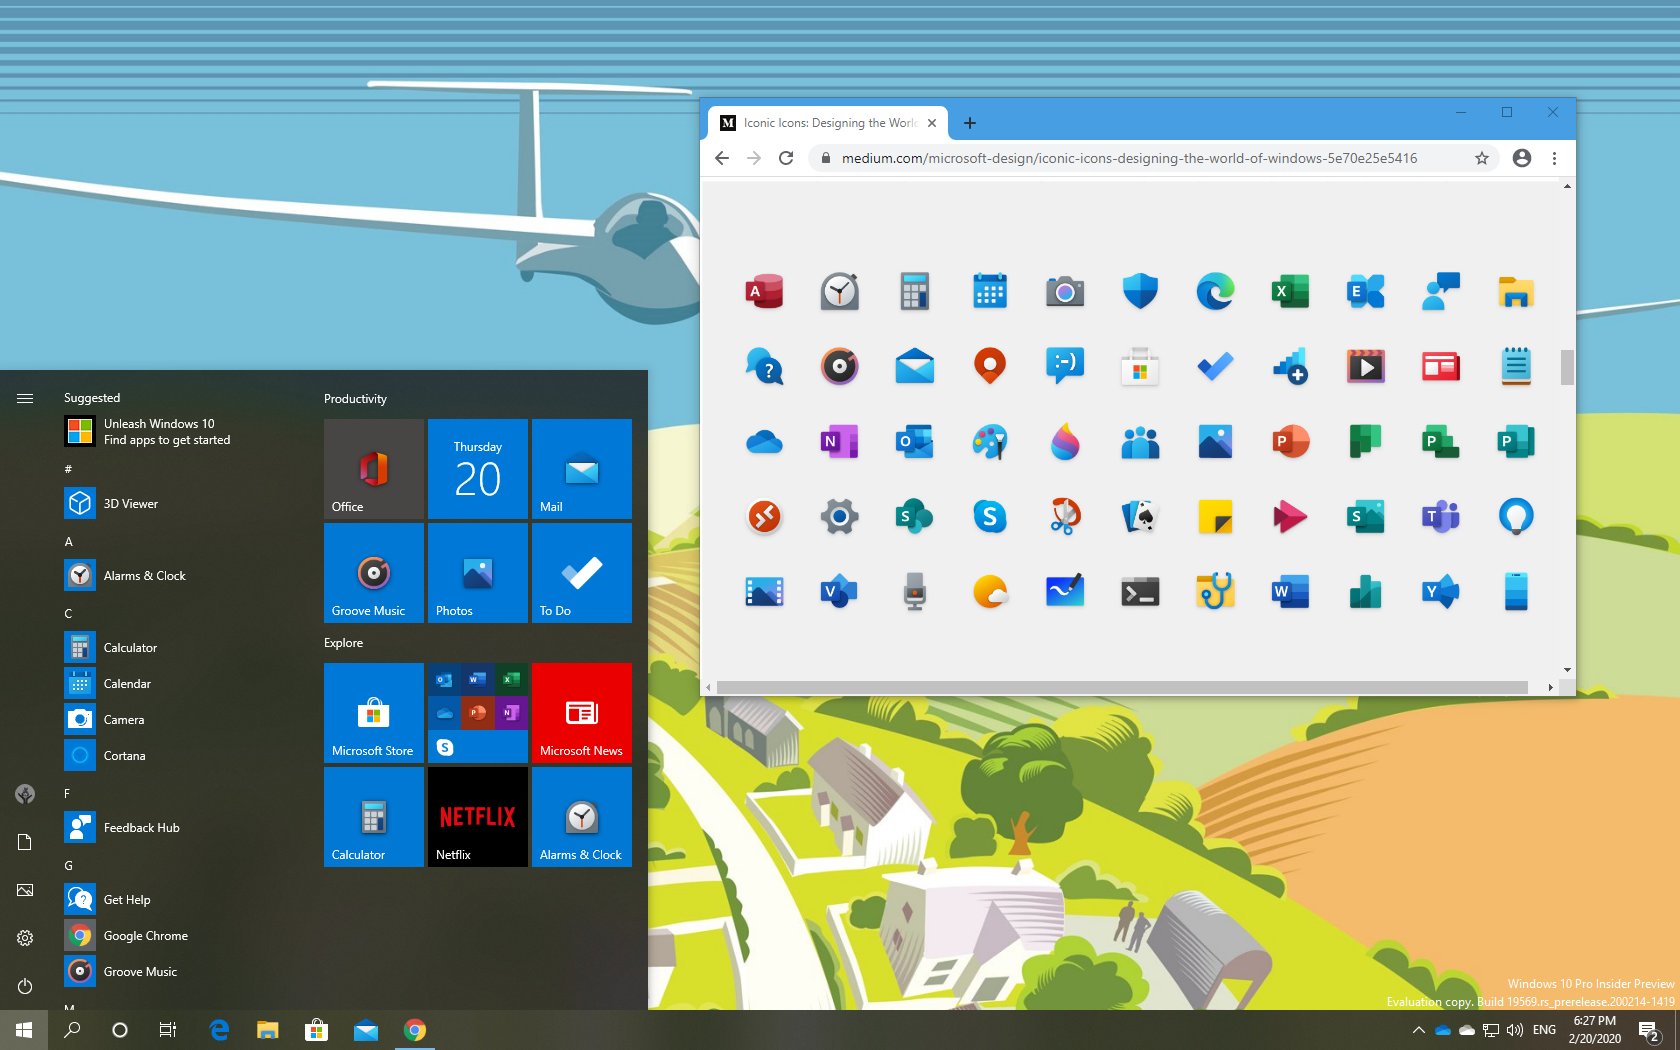 icon pack windows 10 icons